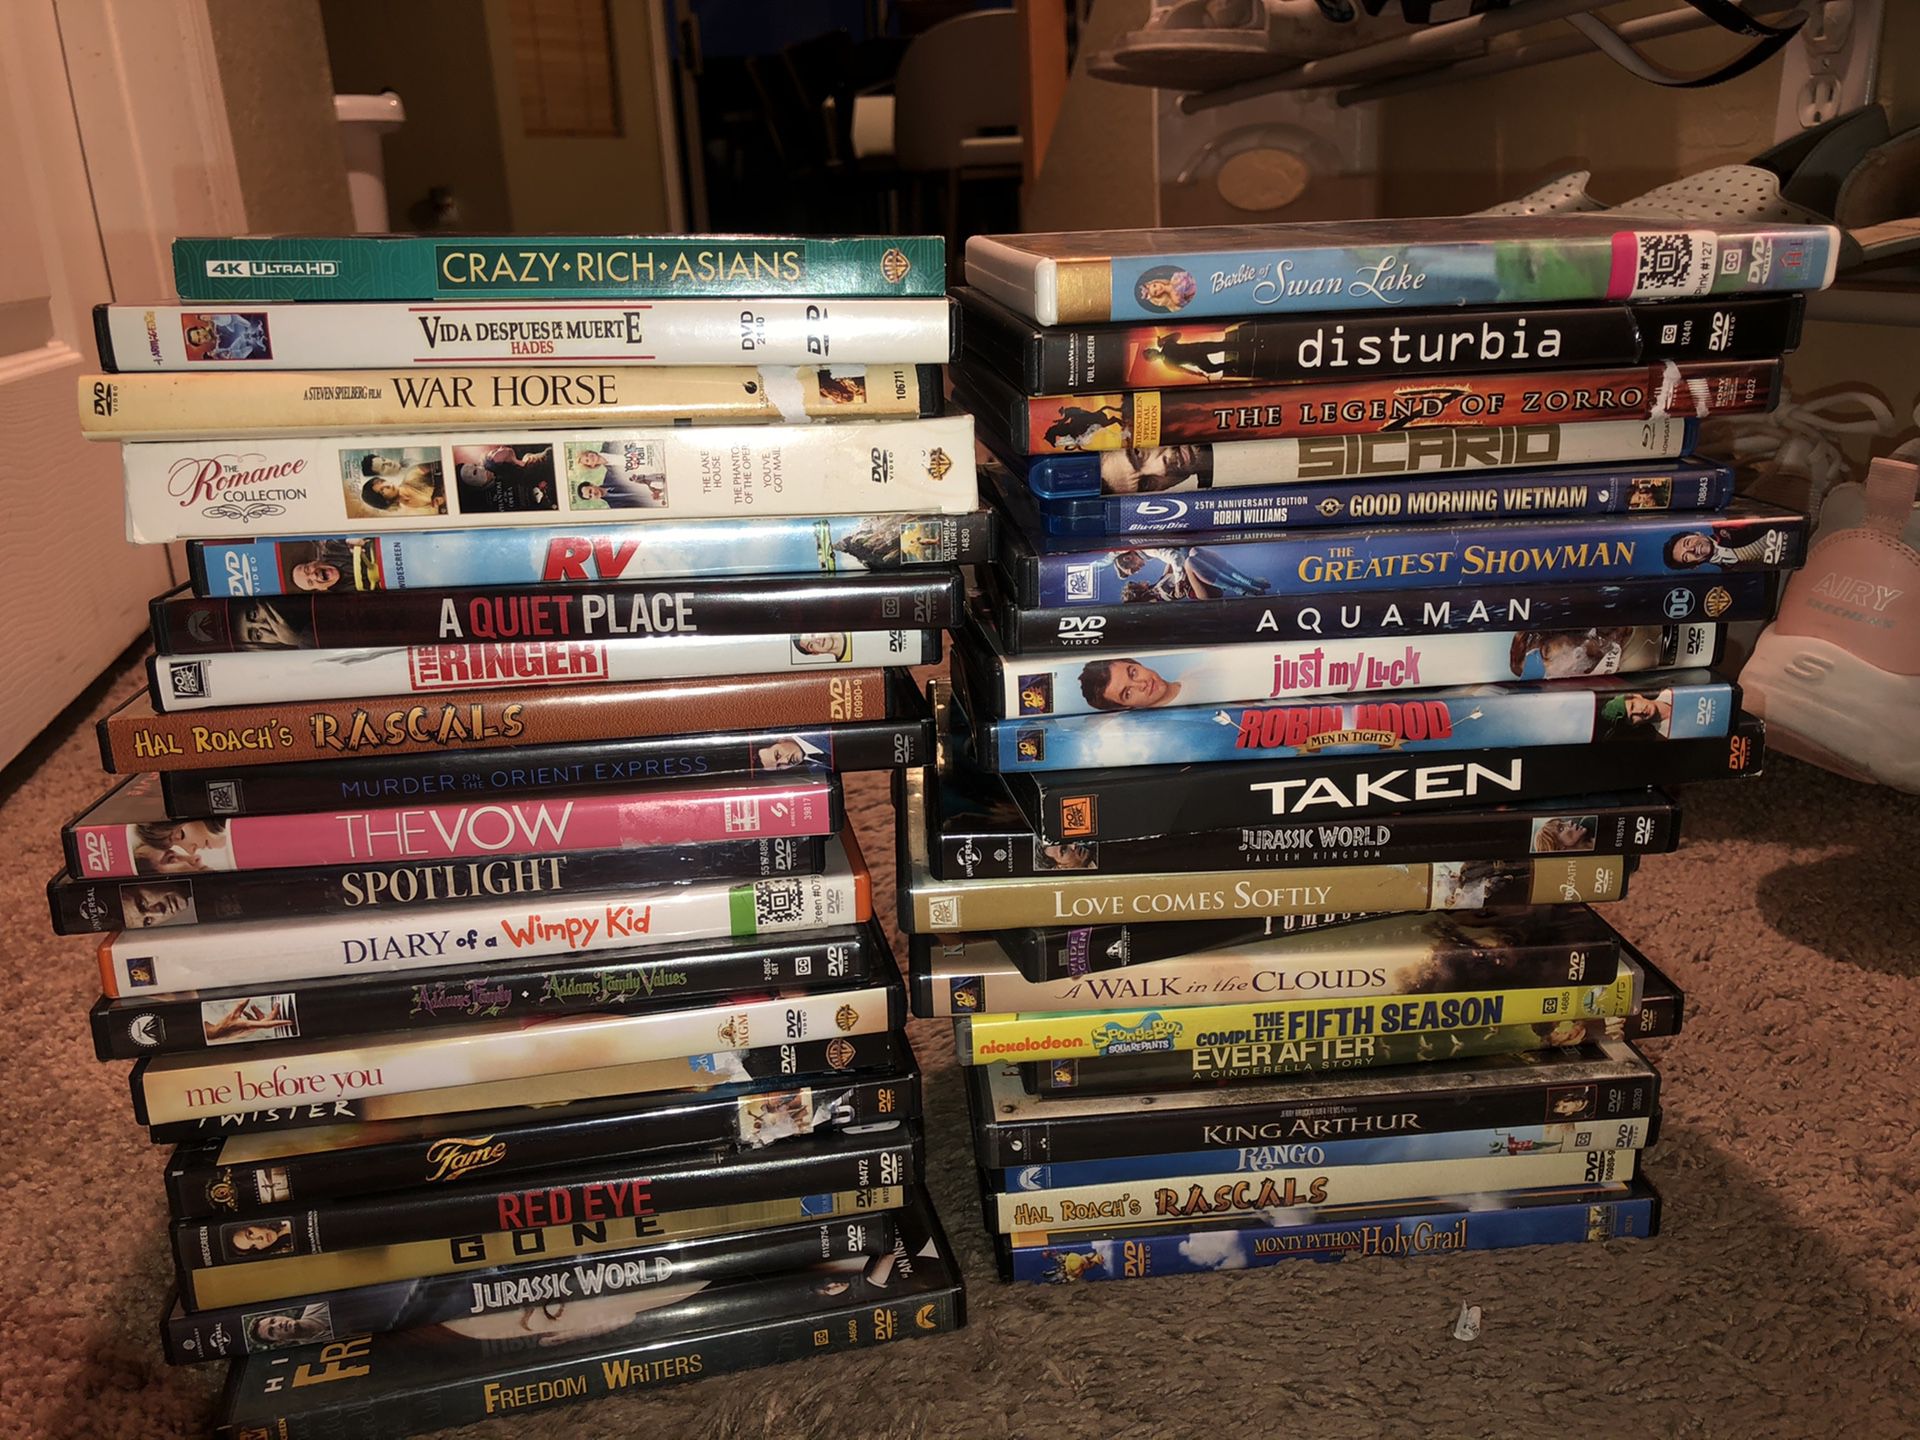 33 DVDs in great condition